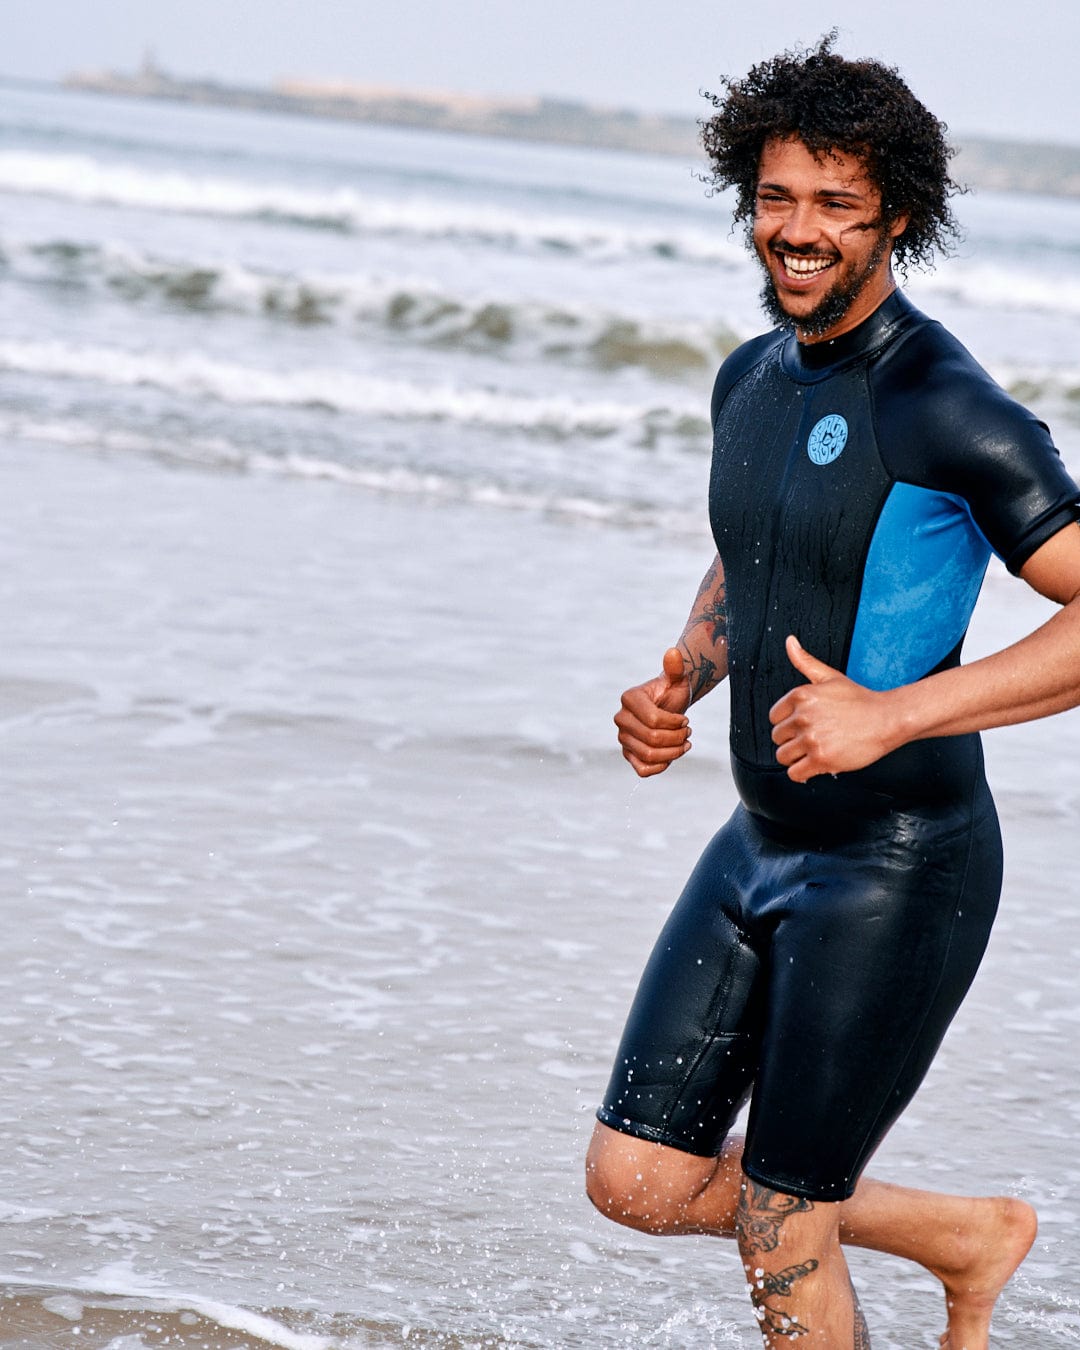 A joyful man in a Saltrock neoprene wetsuit running along a beach, smiling with the ocean in the background.